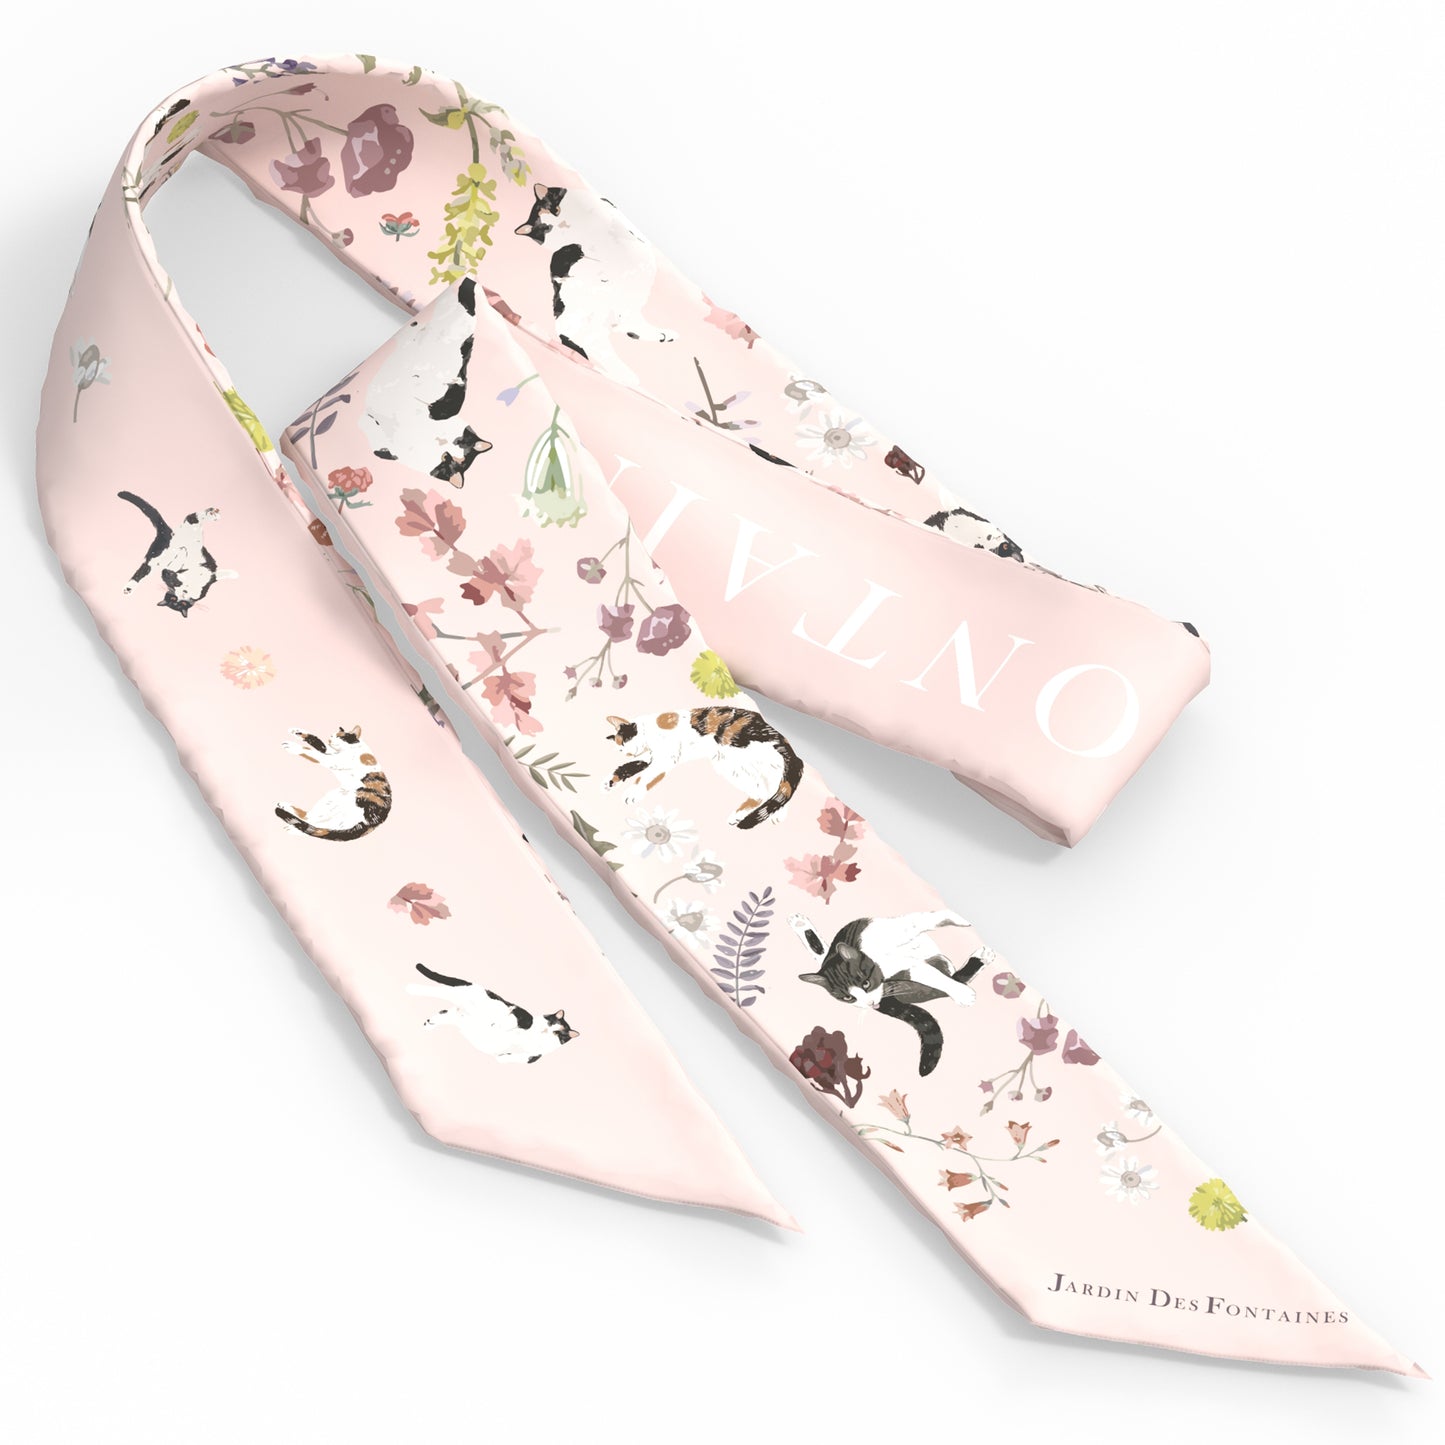 "Yogis Cat and Flower" Twilly Silky Scarf (105cm)